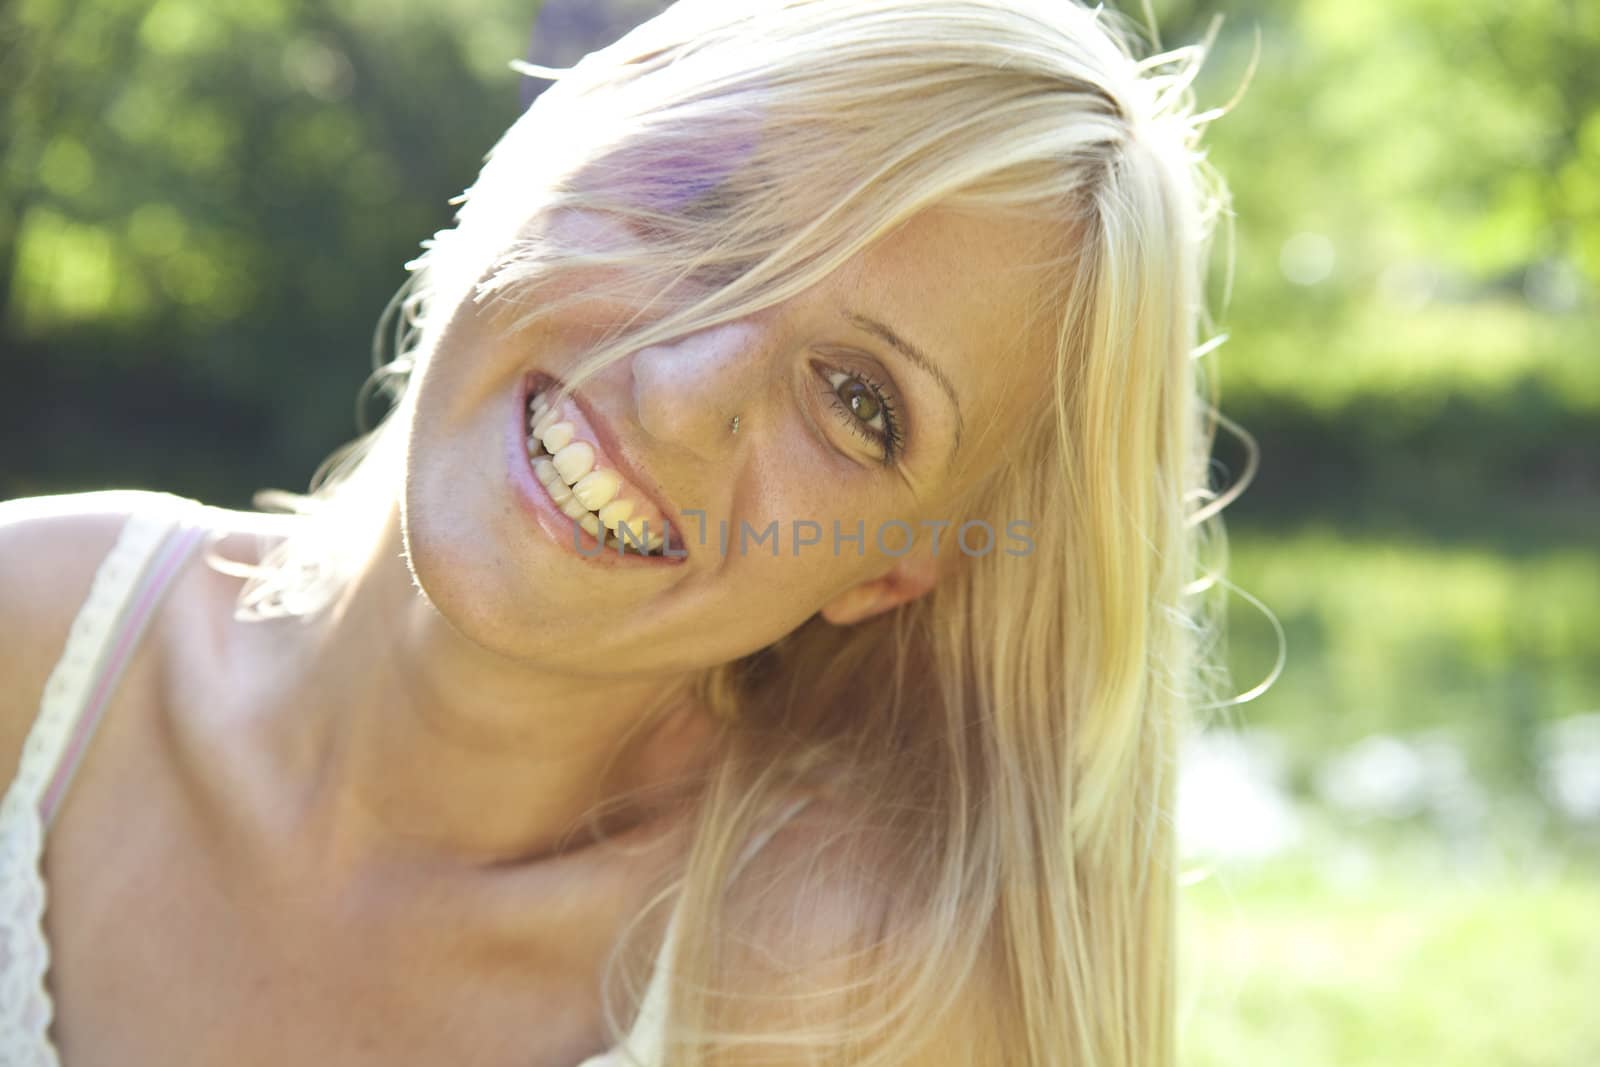 Smiling blond woman resting in green environment